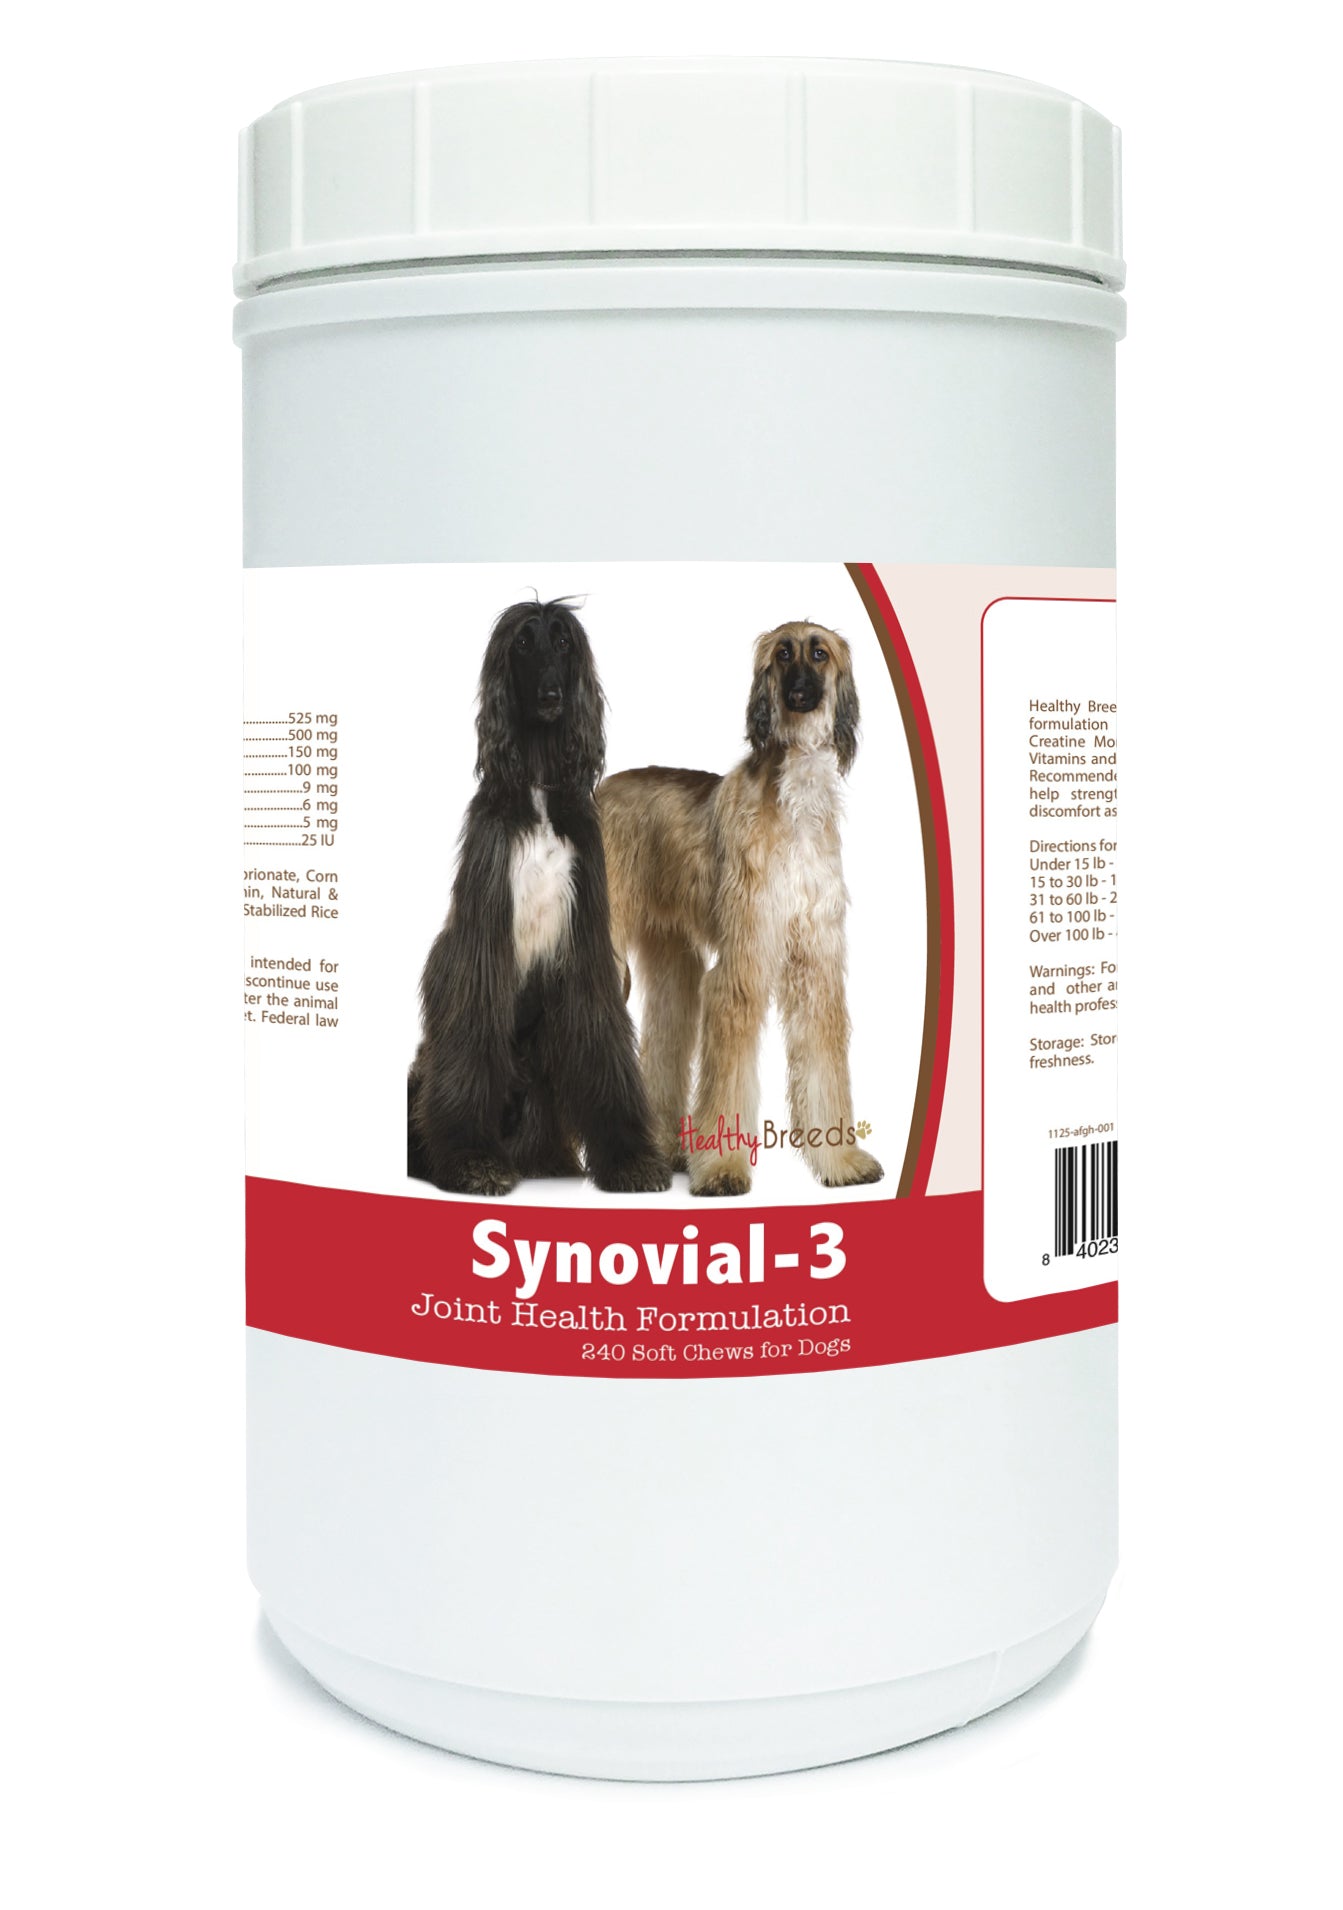 Afghan Hound Synovial-3 Joint Health Formulation Soft Chews 240 Count